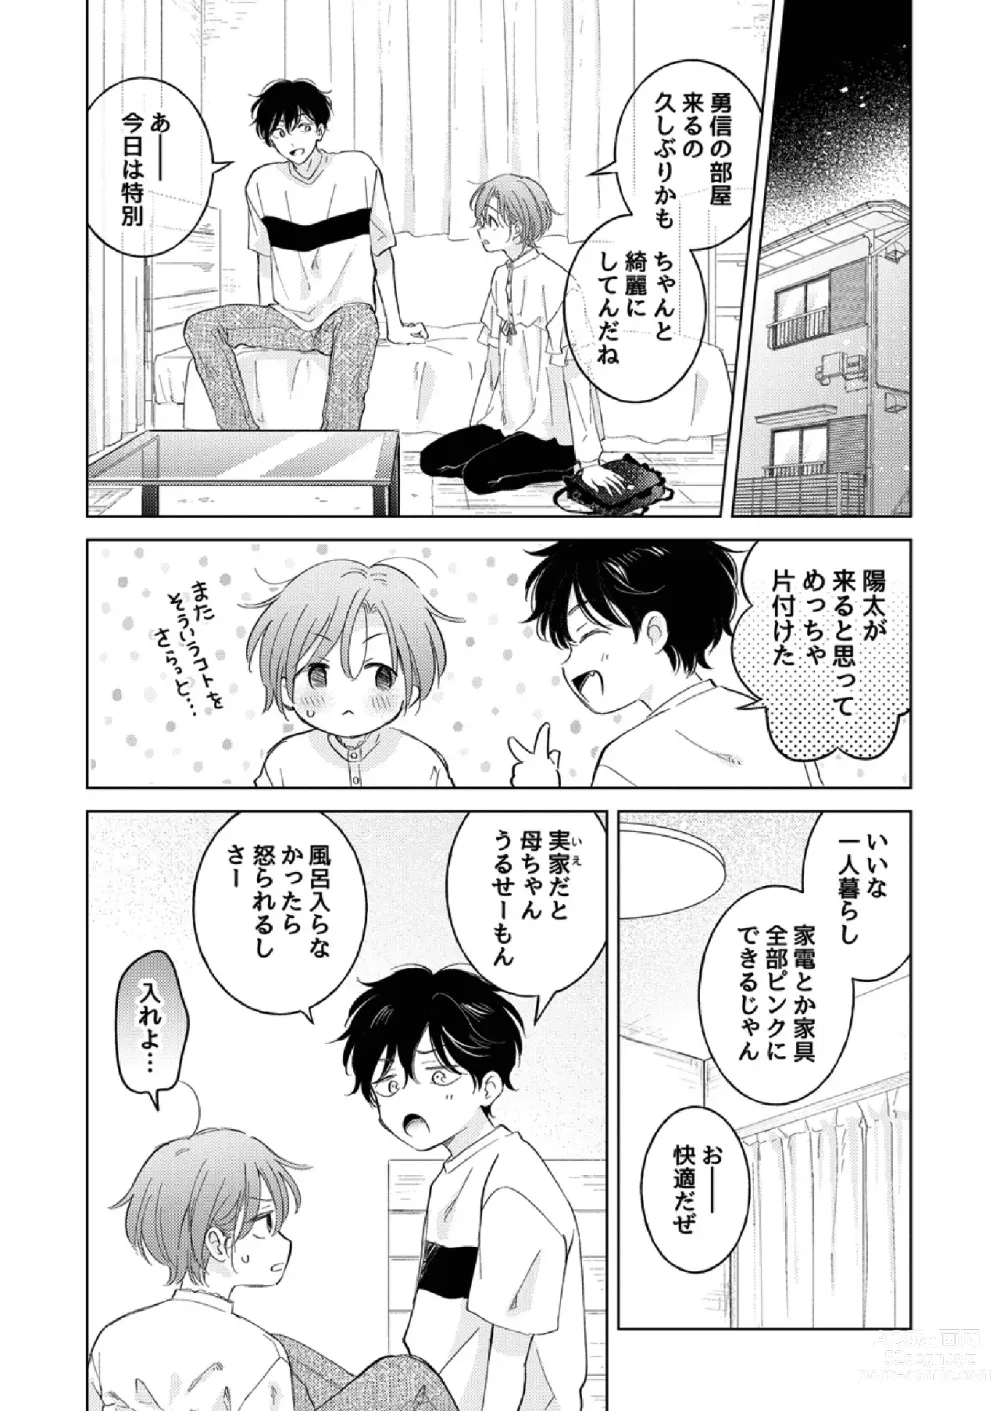 Page 10 of doujinshi How to use Gender-Changing Apps Properly 2